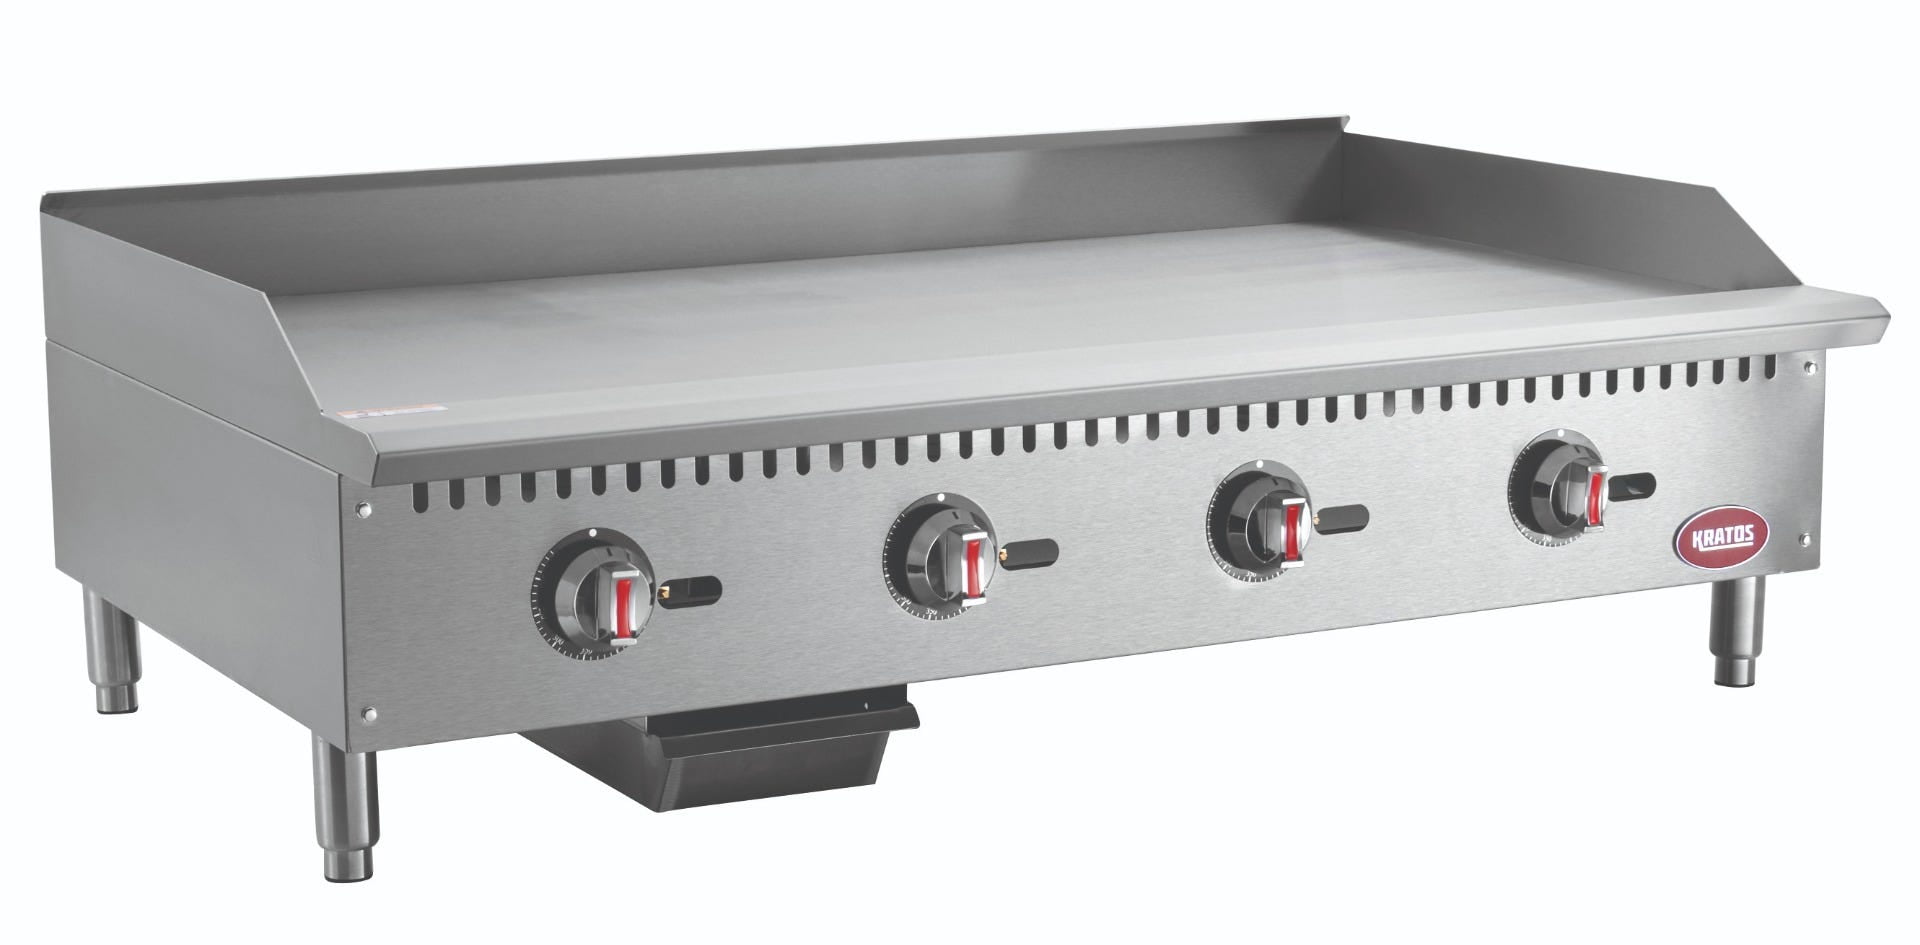 48 in. Commercial Thermostatic Countertop Gas Griddle in Stainless Steel